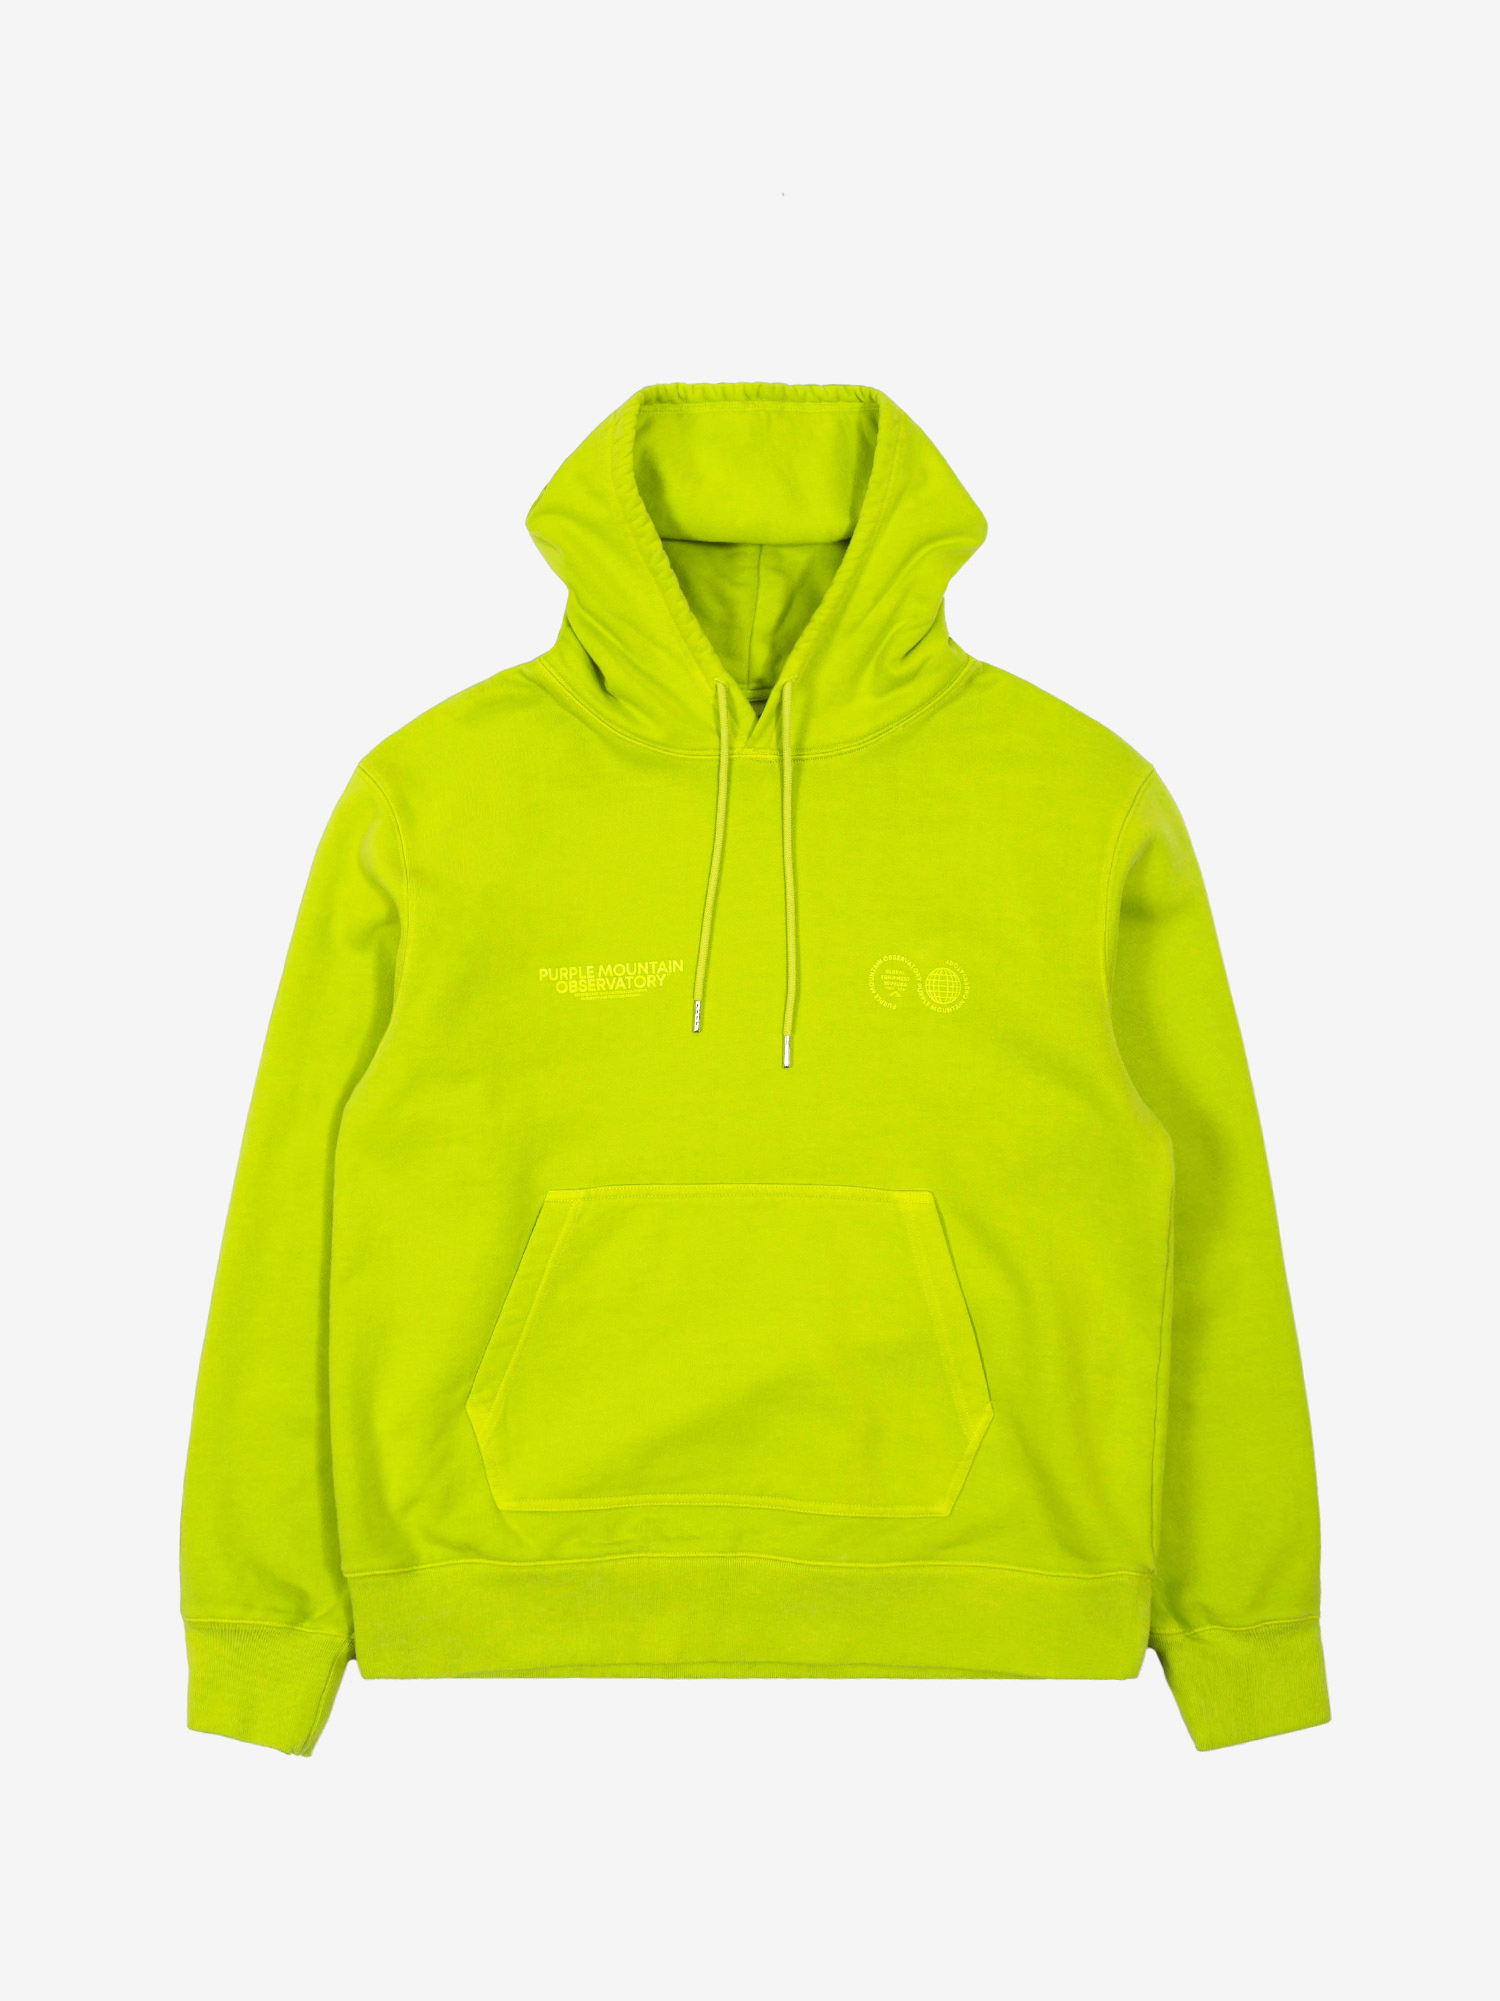 Featured image for “GARMENT DYED HEAVYWEIGHT HOODY LIME”